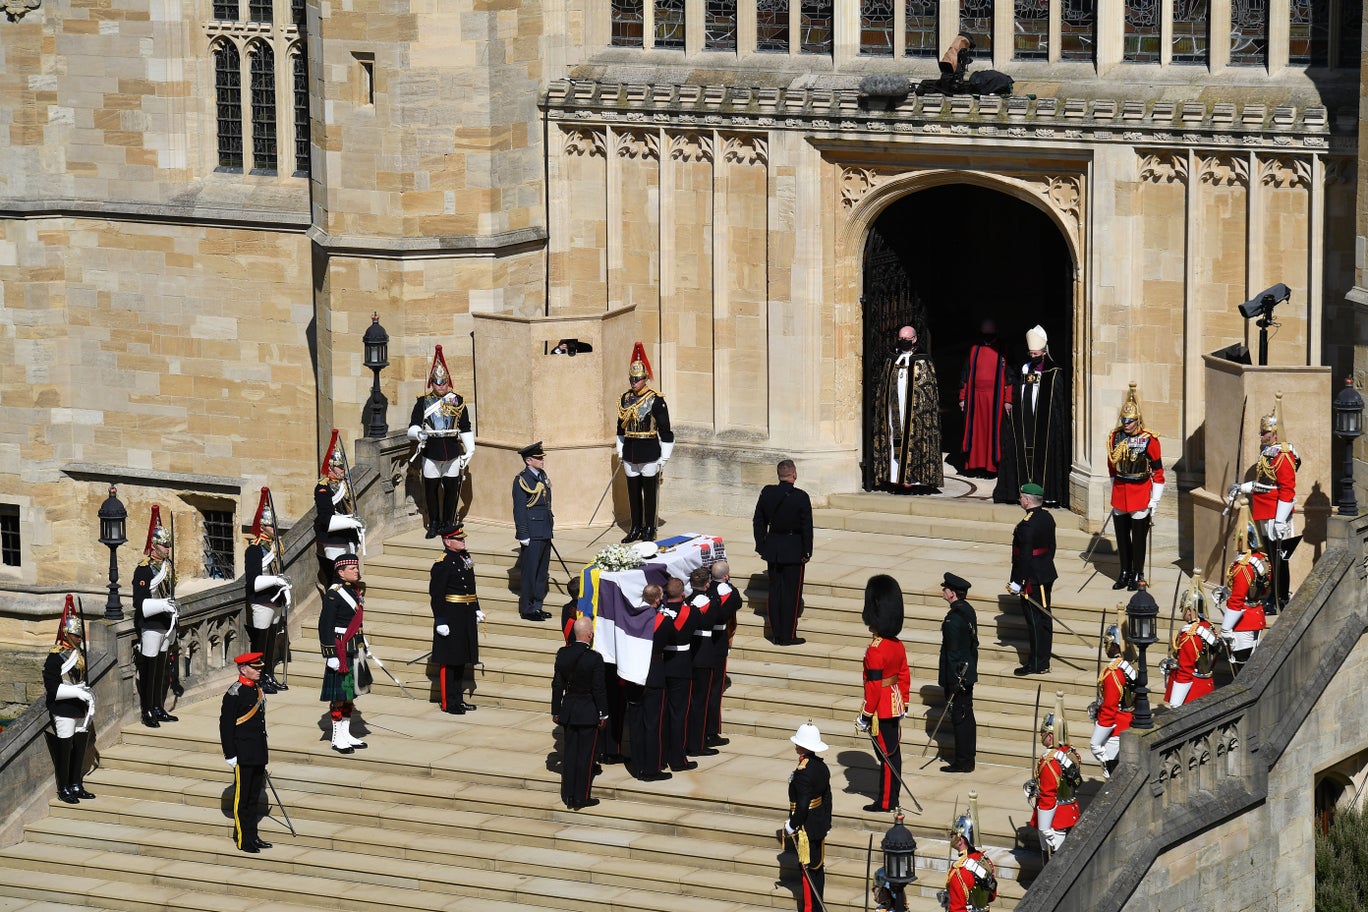 Prince Philip Funeral